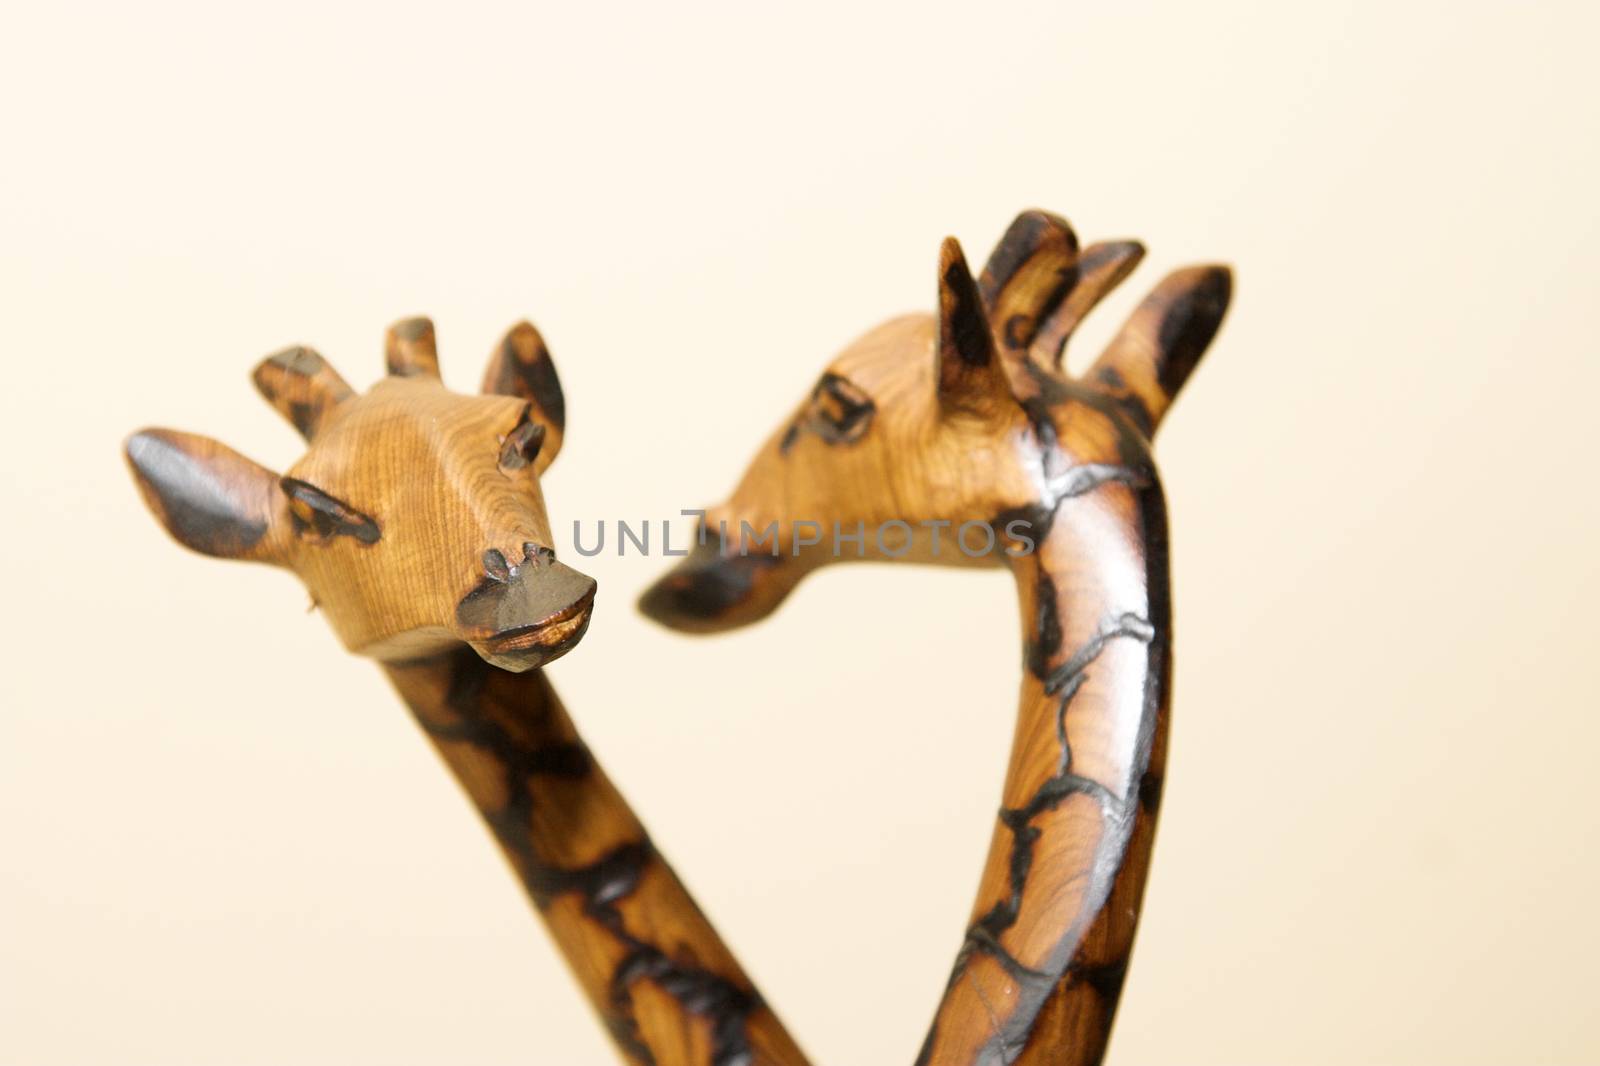 A wooden giraffe figurine and its reflection